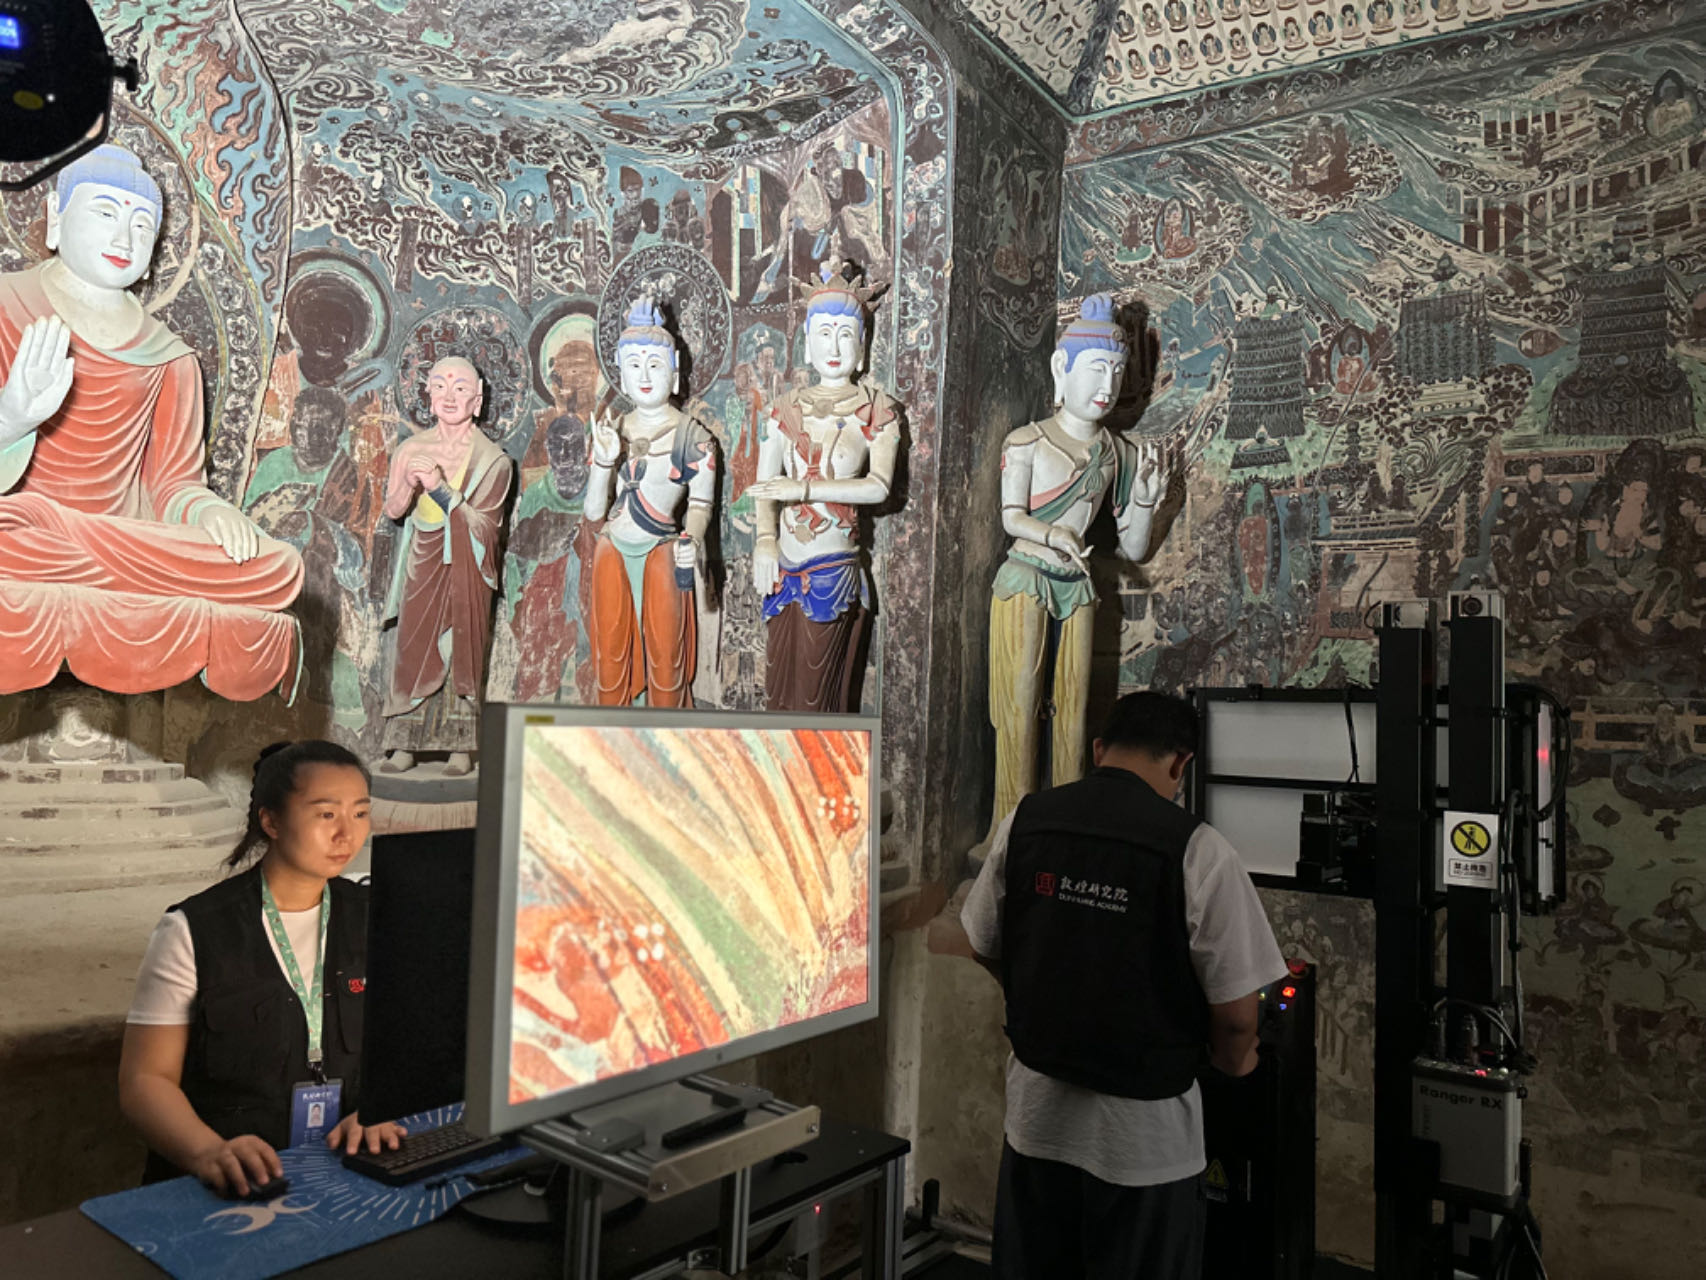 Staff from the Dunhuang Academy work on digitizing images taken in a cave at the Mogao Grottoes in Dunhuang, Gansu Province, on September 5, 2023. /CGTN